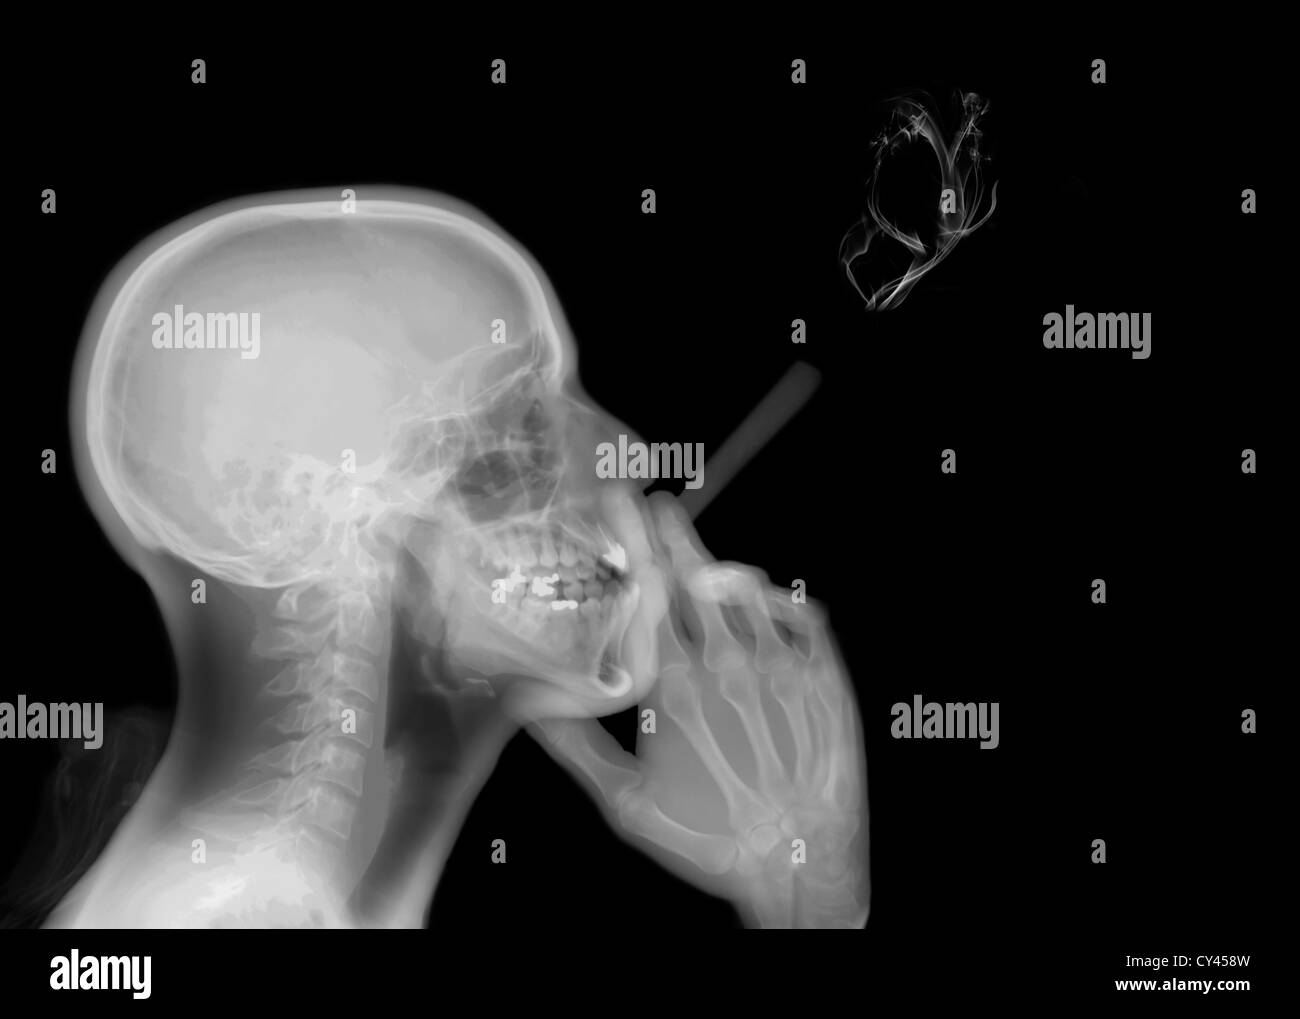 X-ray of a man smoking a cigarette Banque D'Images